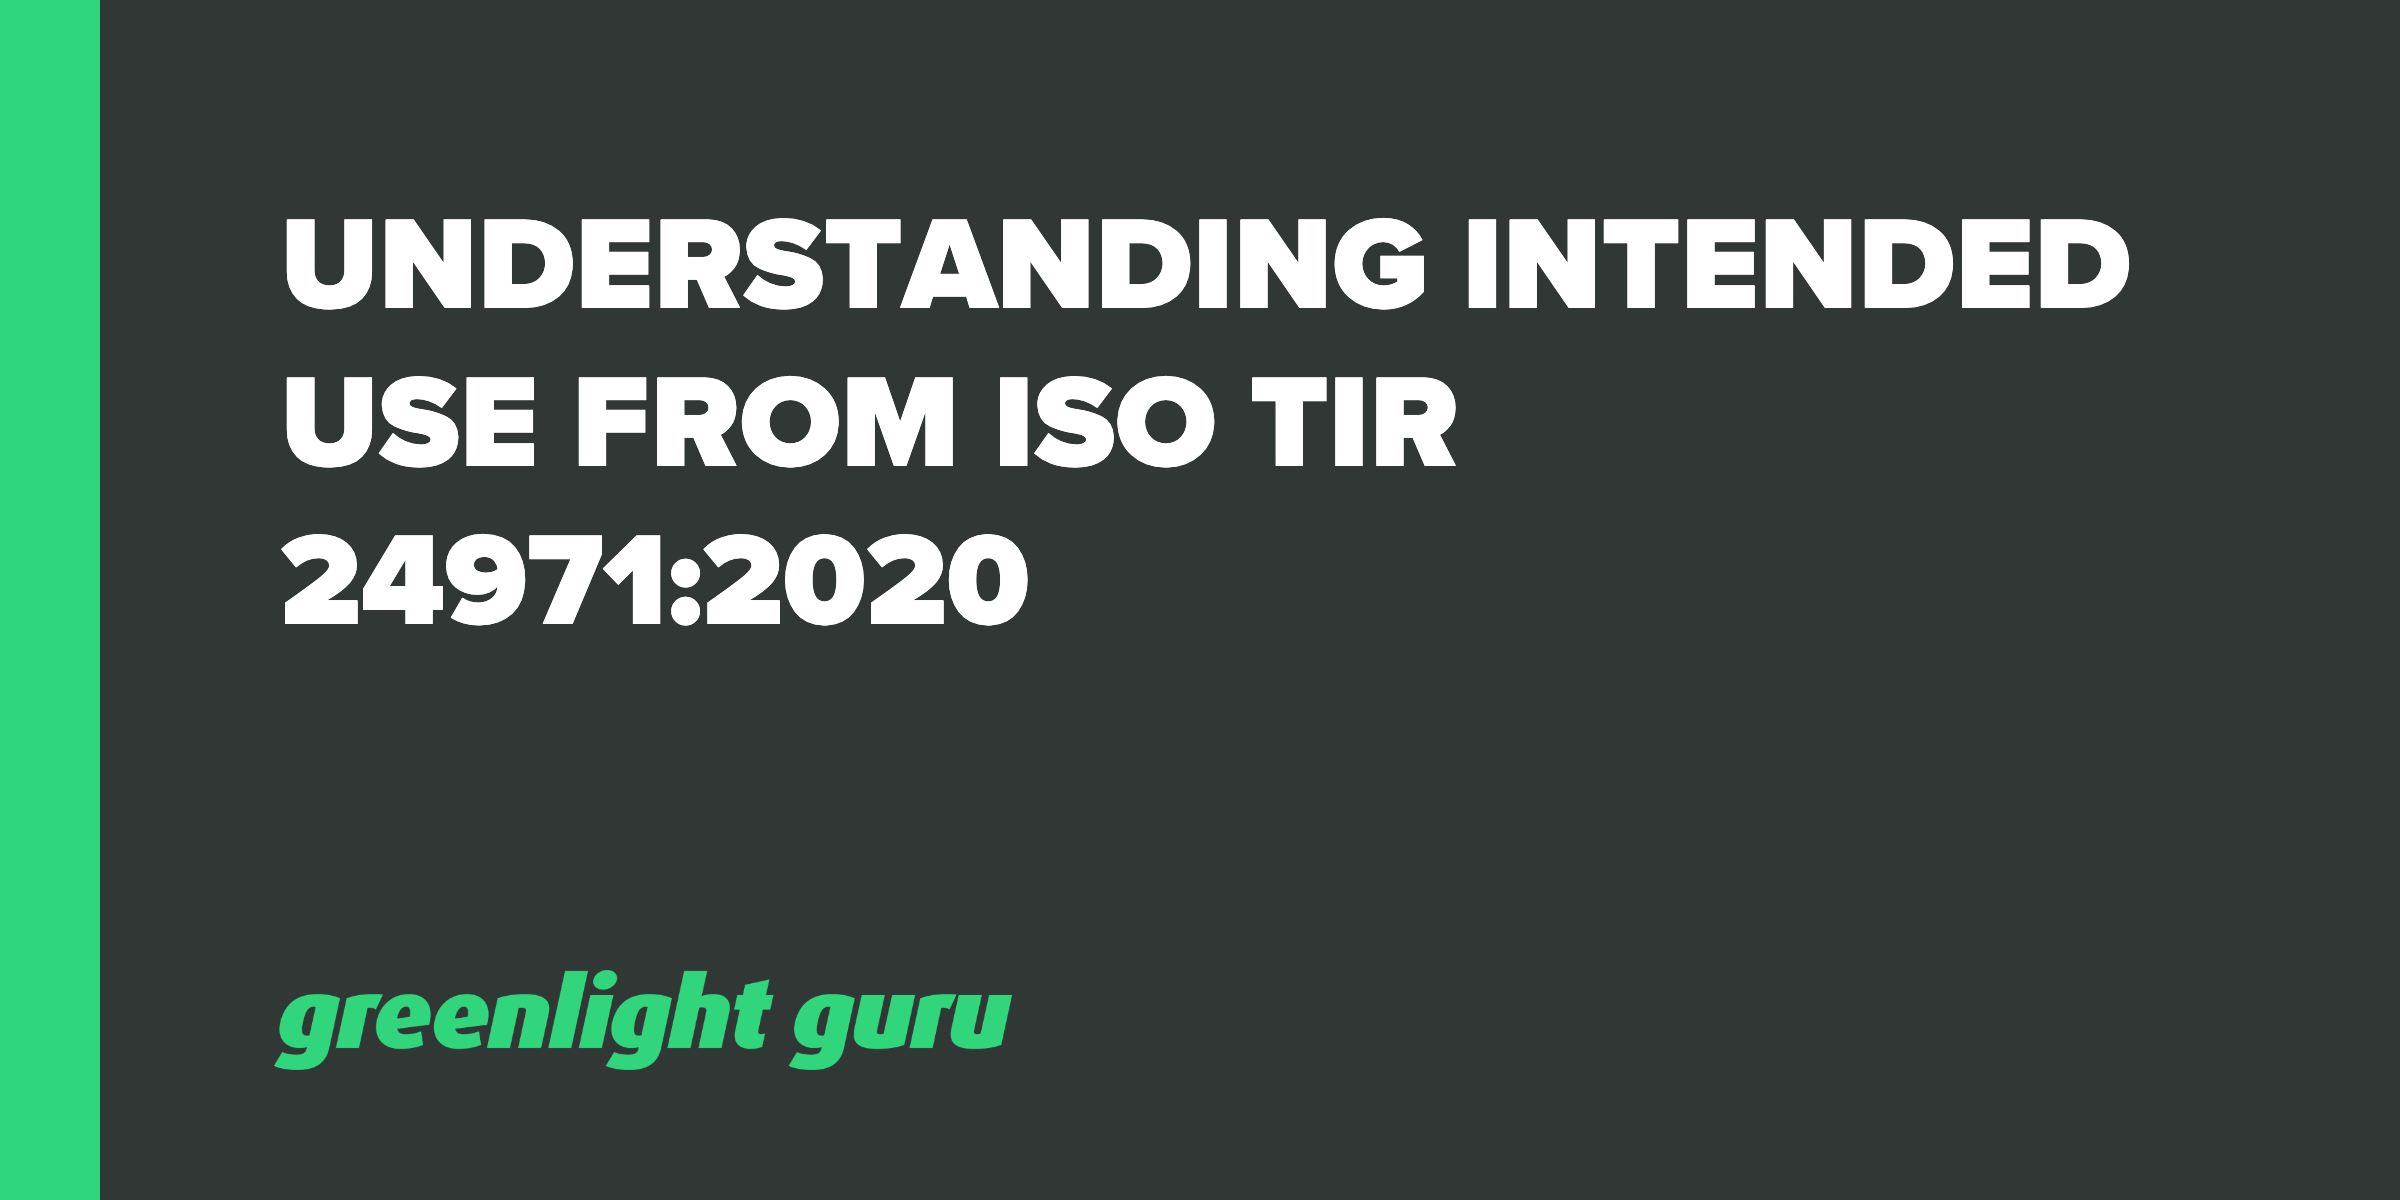 Understanding Intended Use from ISO TR 24971:2020